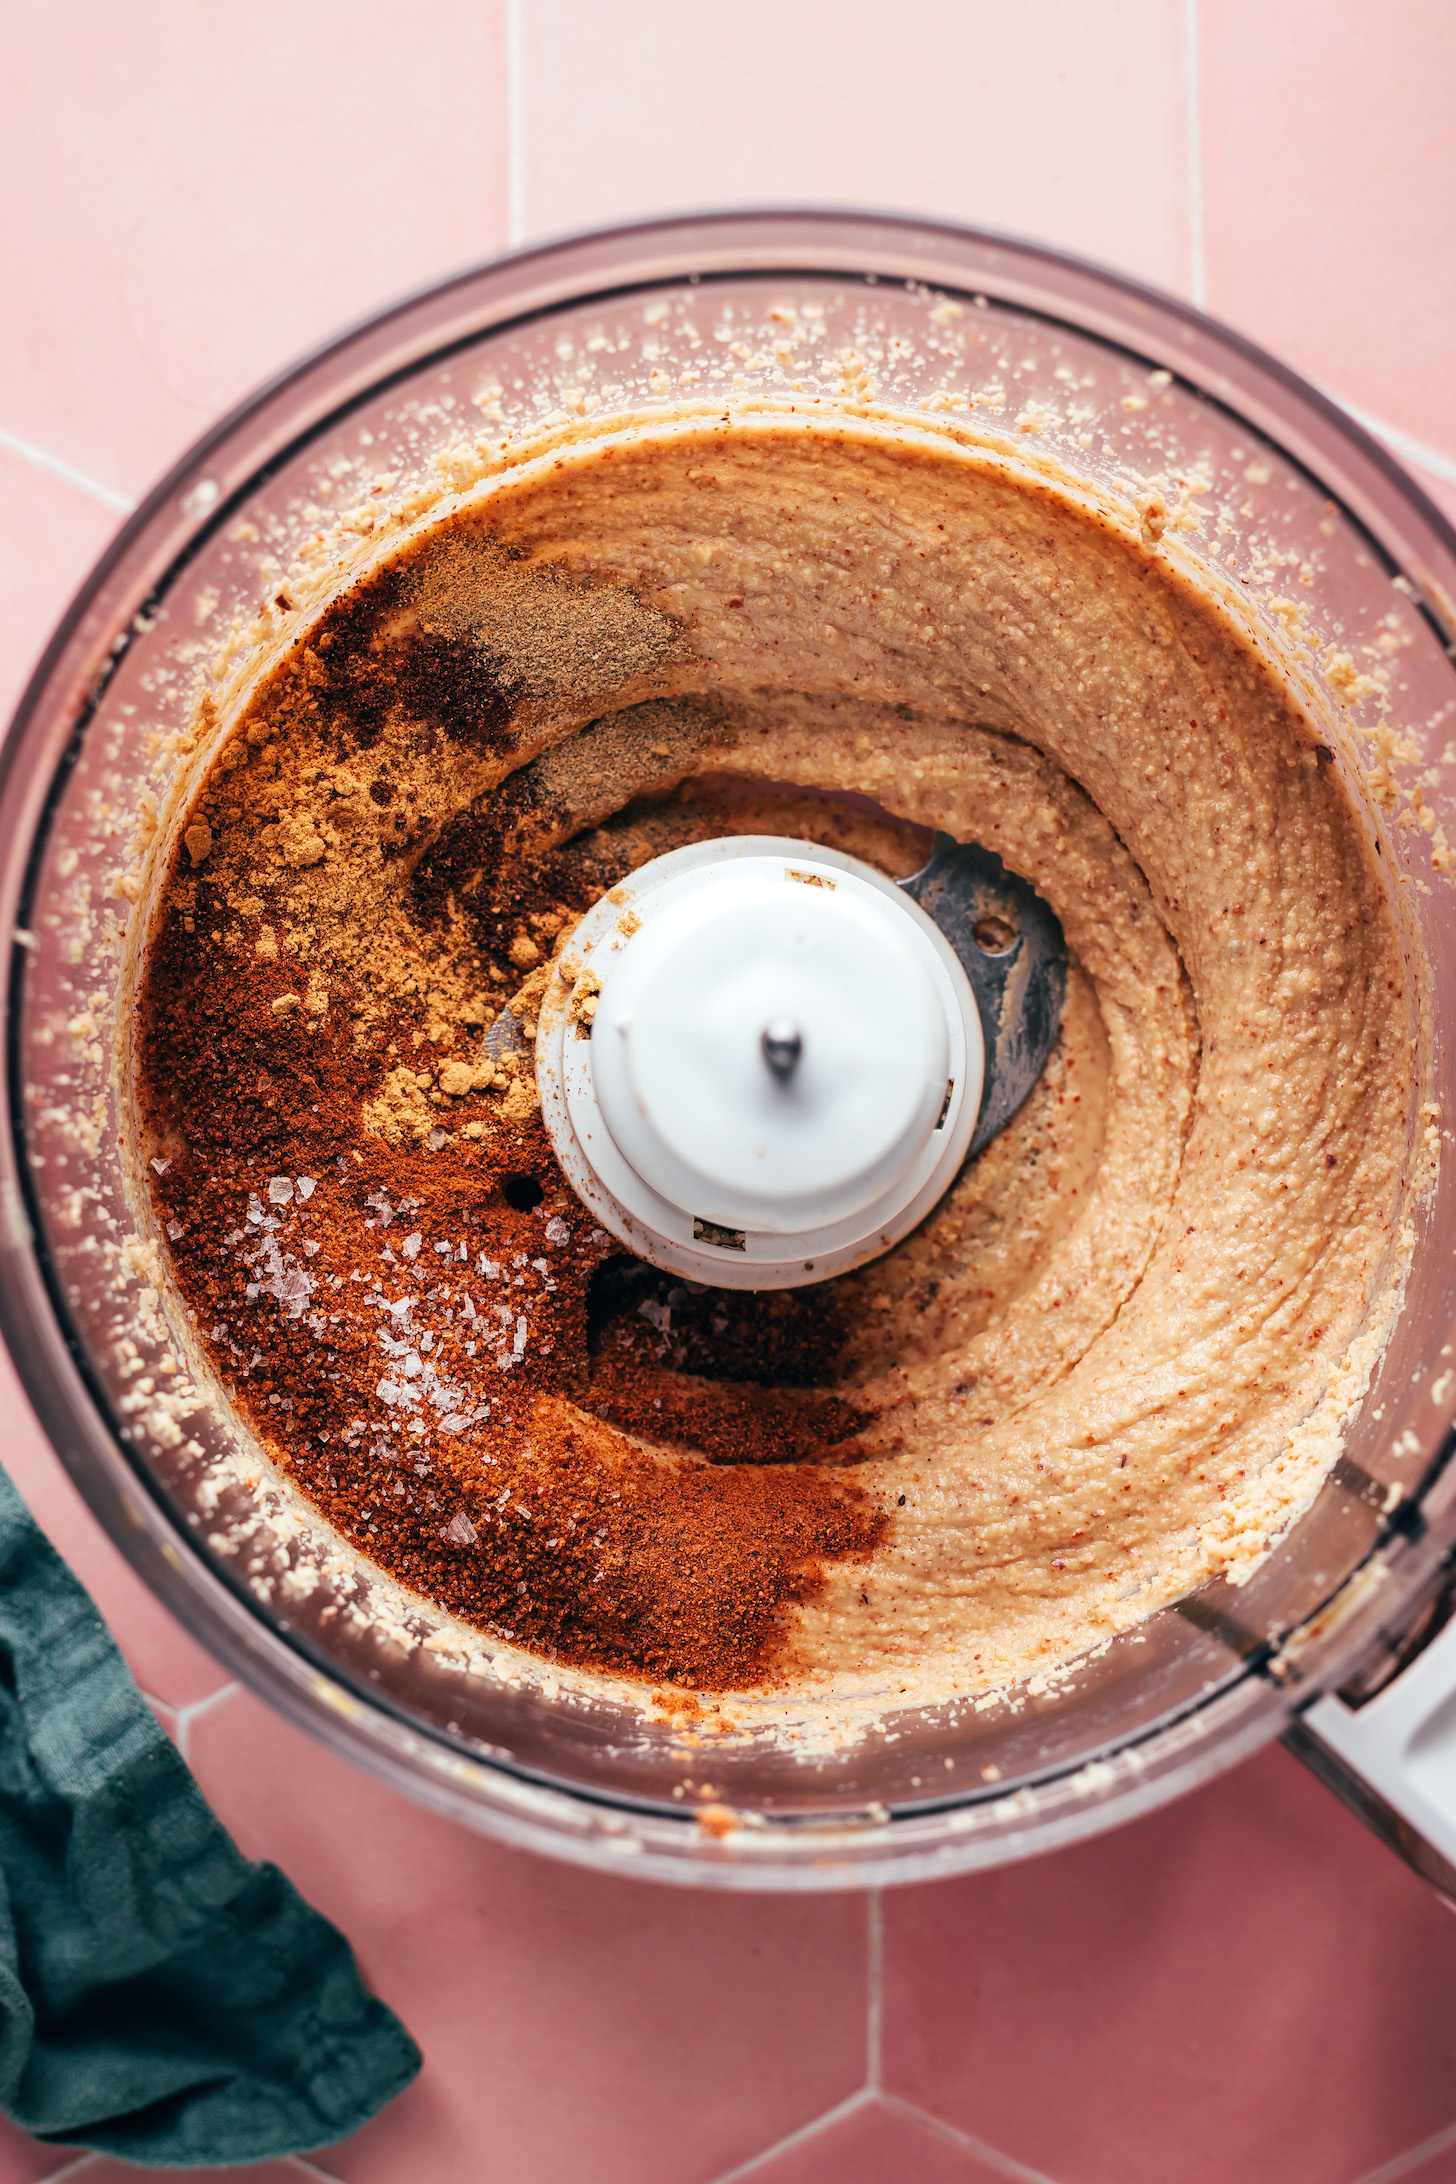 Coconut sugar, salt, and spices in a food processor of homemade nut butter